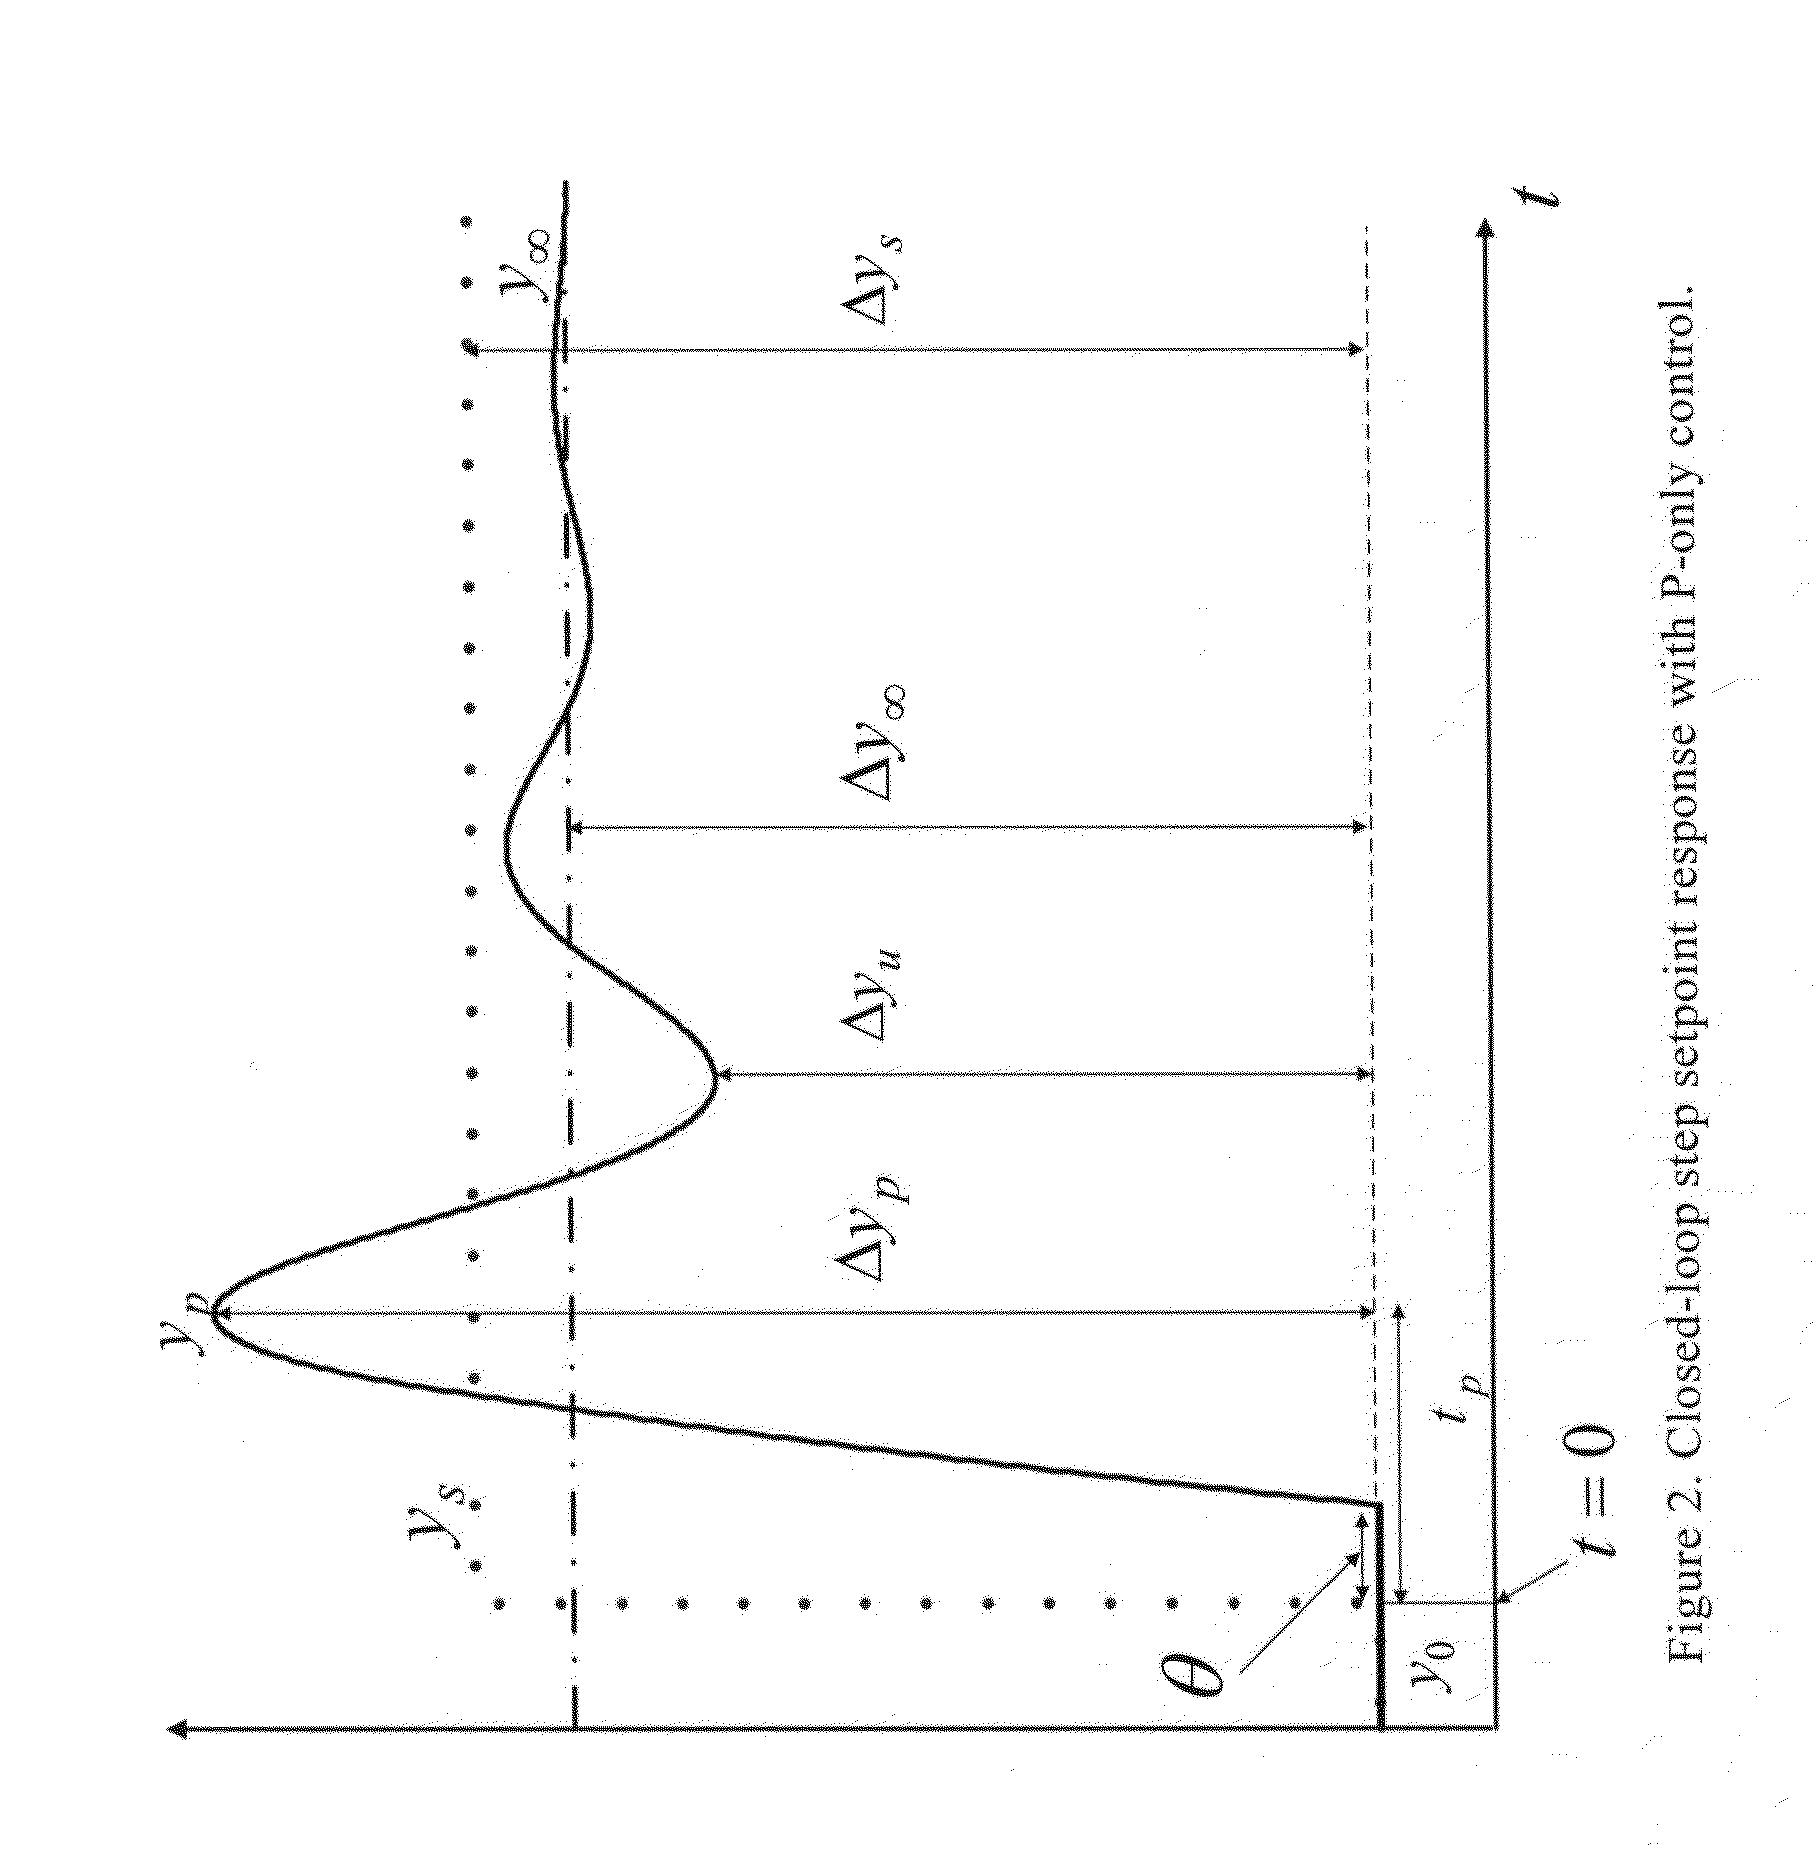 Closed loop PI/PID controller tuning method for stable and integrating process with time delay